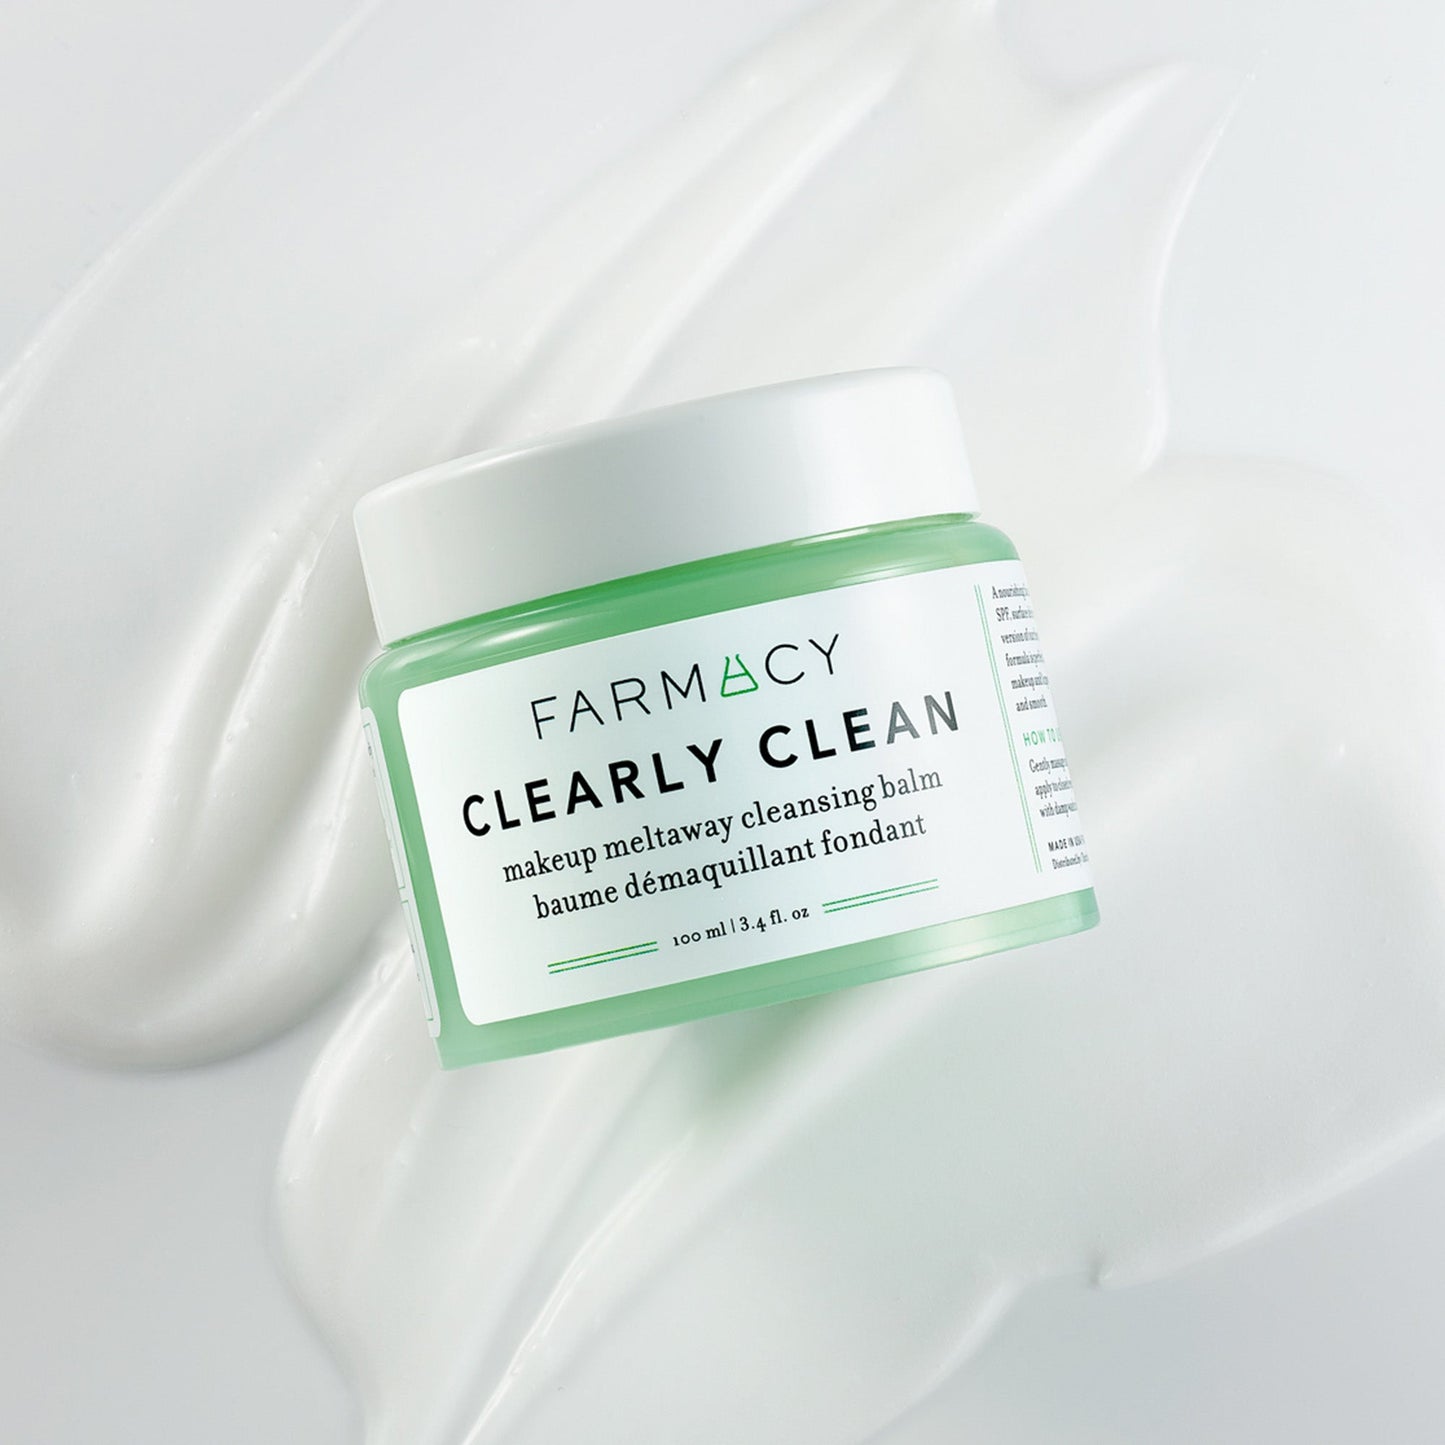 Farmacy Clearly Clean Cleansing Balm